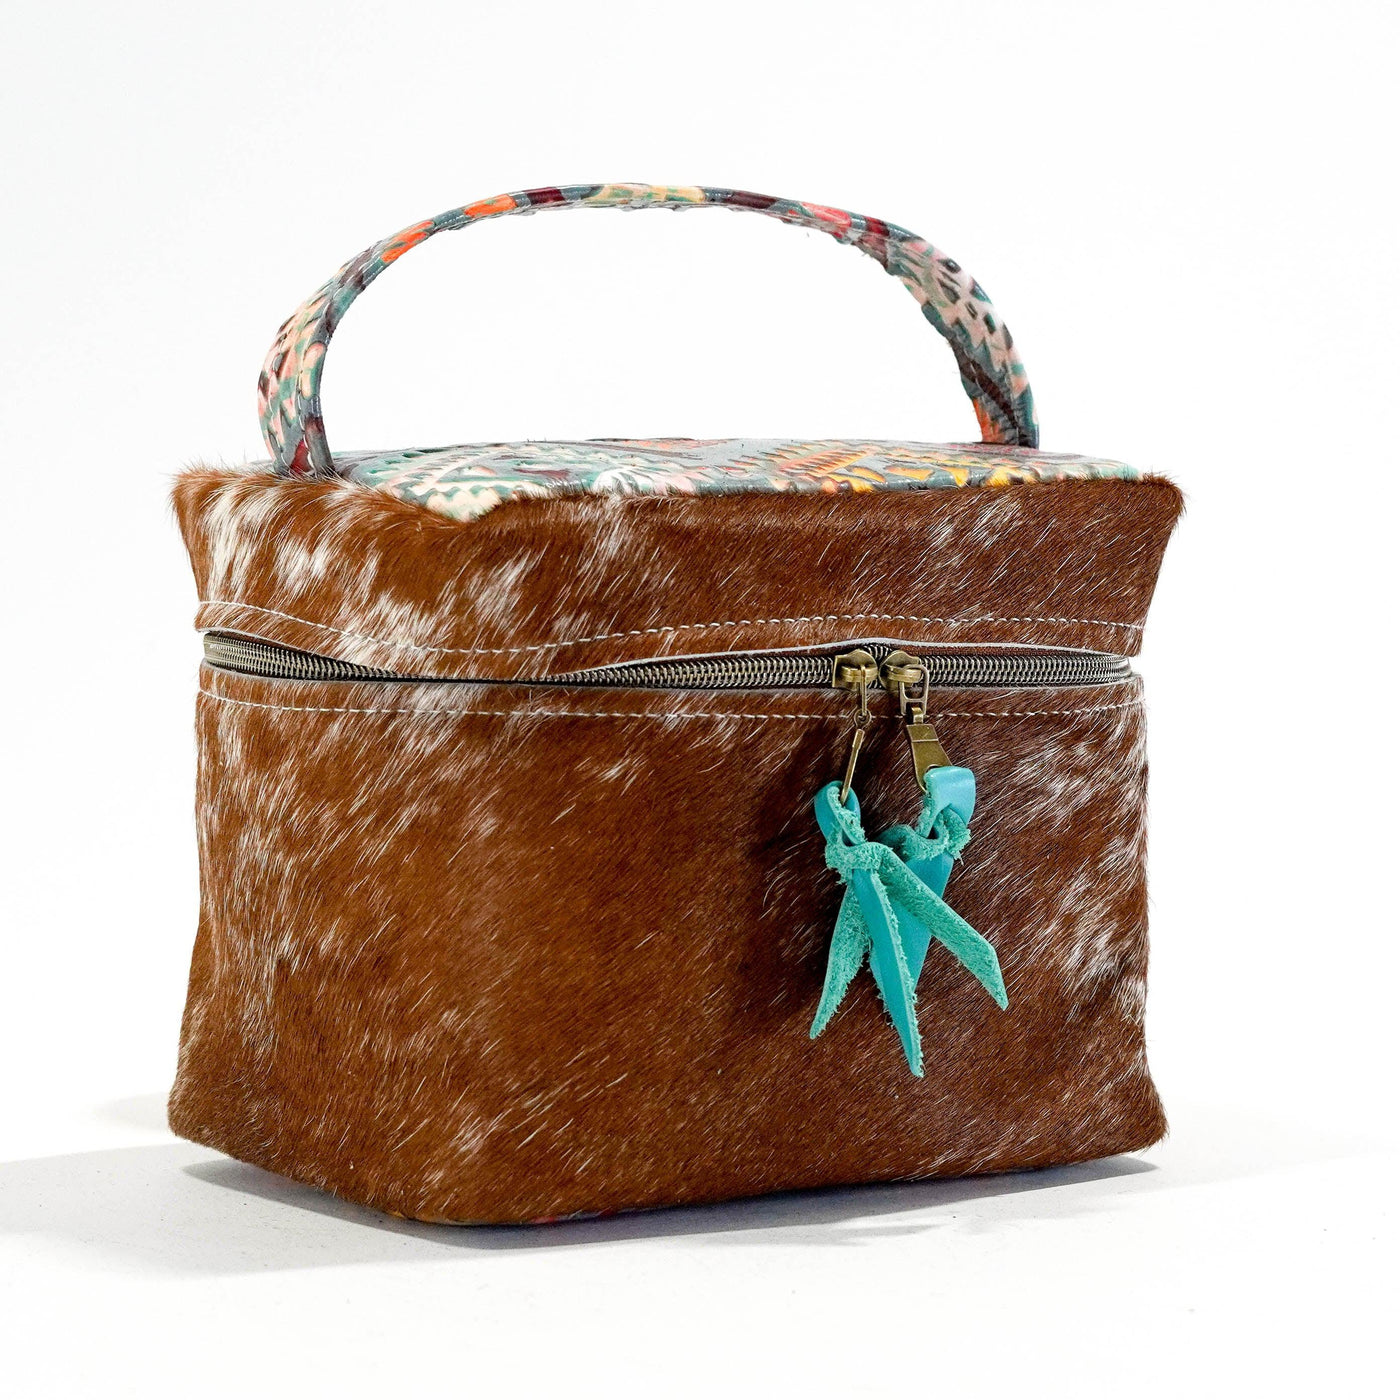 Caboose - Longhorn w/ Rainbow Aztec-Caboose-Western-Cowhide-Bags-Handmade-Products-Gifts-Dancing Cactus Designs